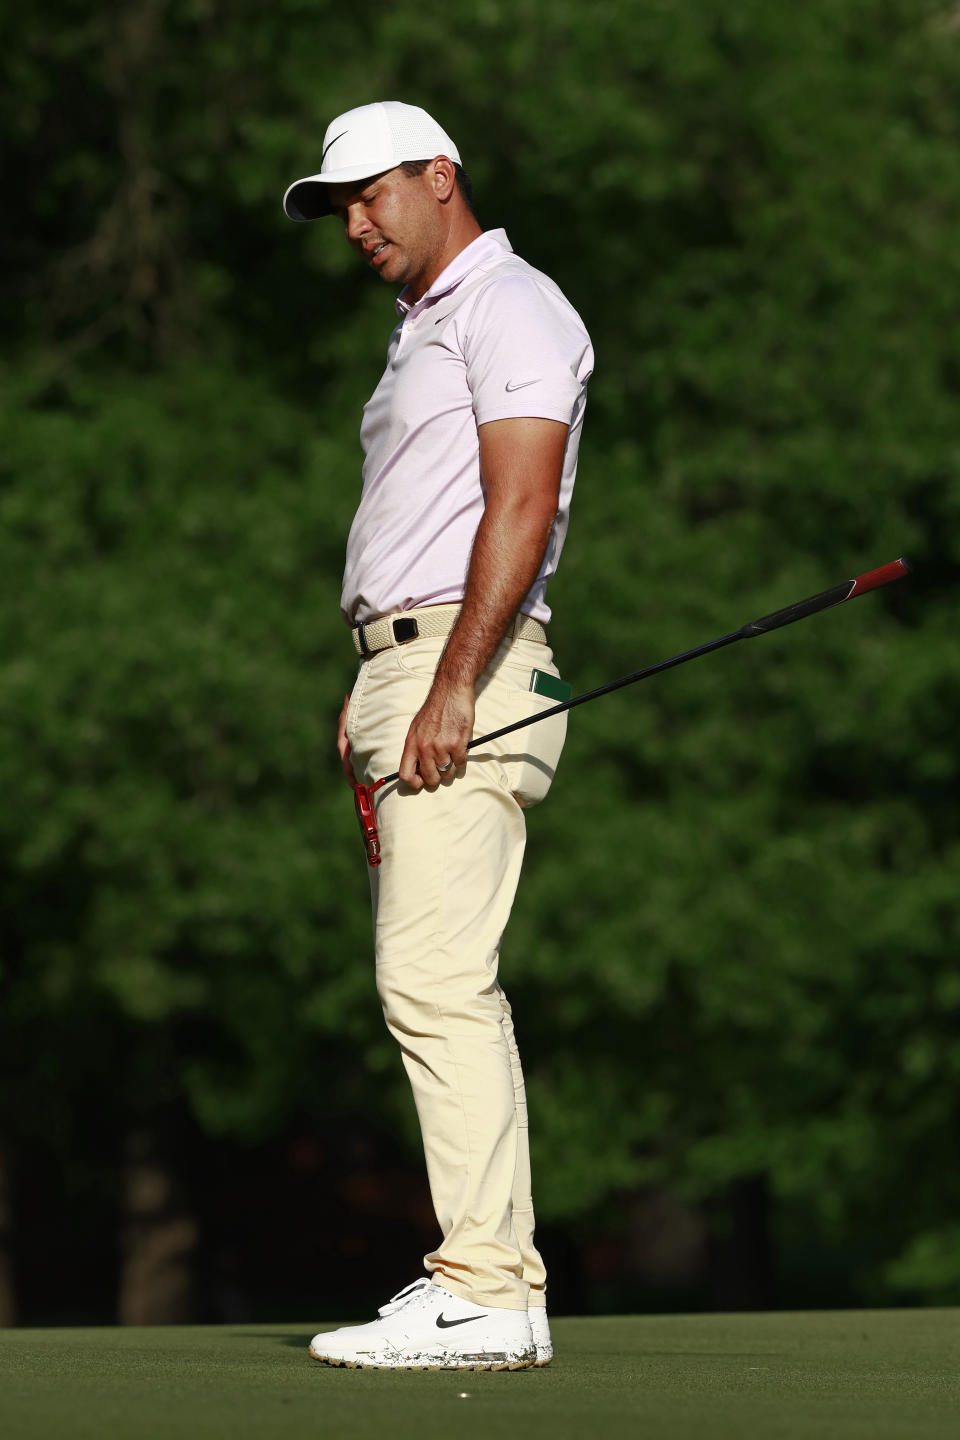 Jason Day reacts to his putt on the 12th hole during the first round of the Wells Fargo Championship golf tournament at Quail Hollow Club in Charlotte, N.C., Thursday, May 2, 2019. (AP Photo/Jason E. Miczek)